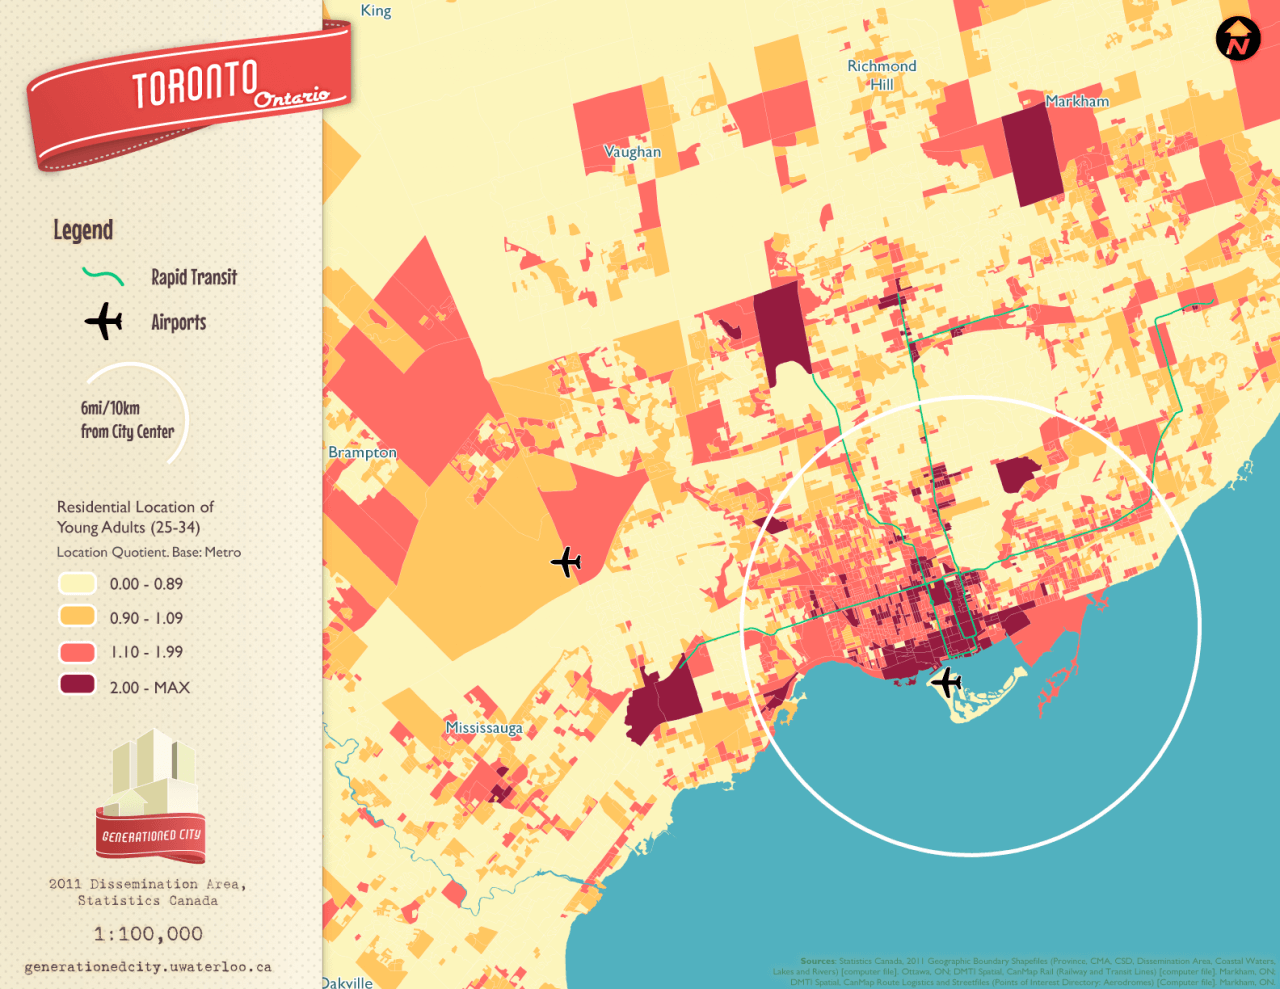 Residential location of young adults in Toronto.